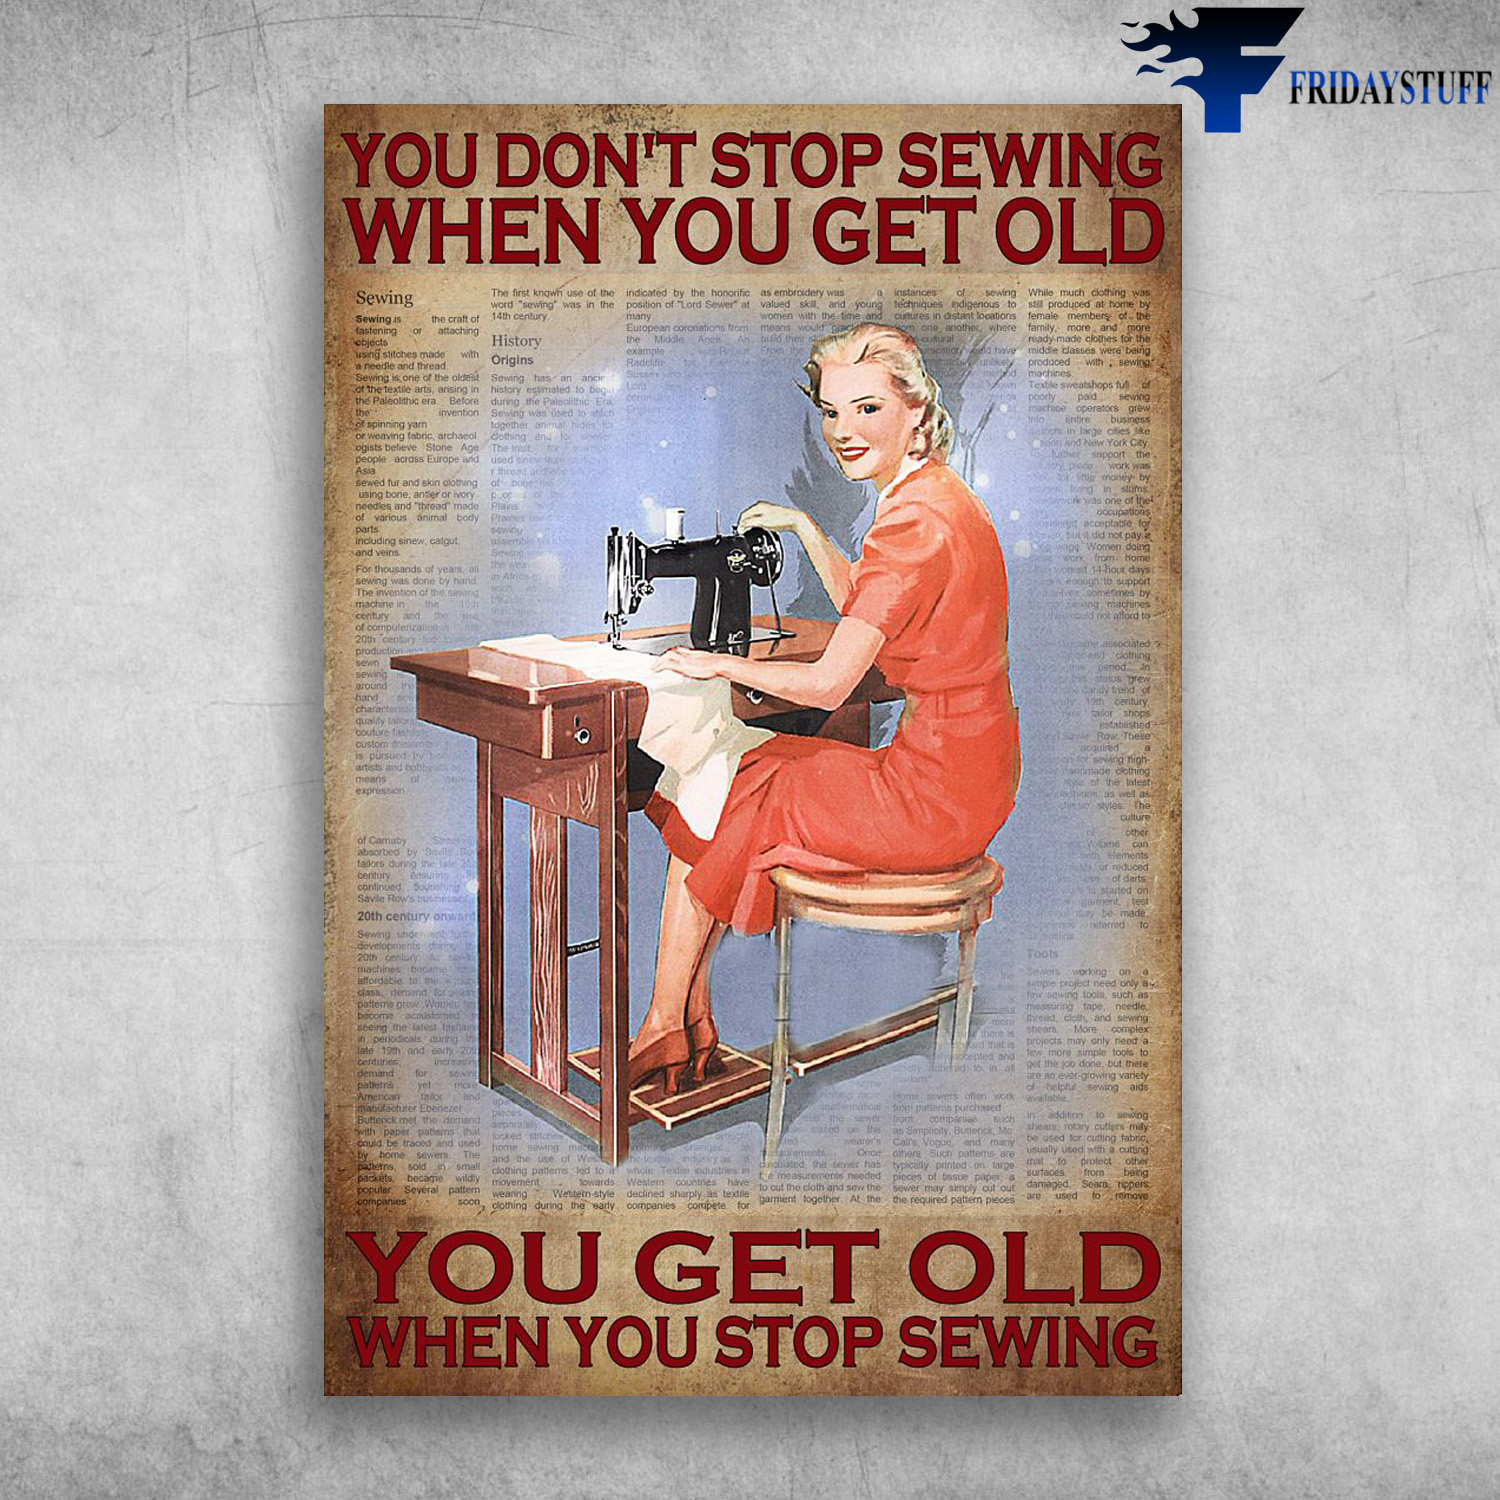 The Girl Sewing - You Don't Stop Sewing When You Get Old, You Get Old When You Stop Sewing